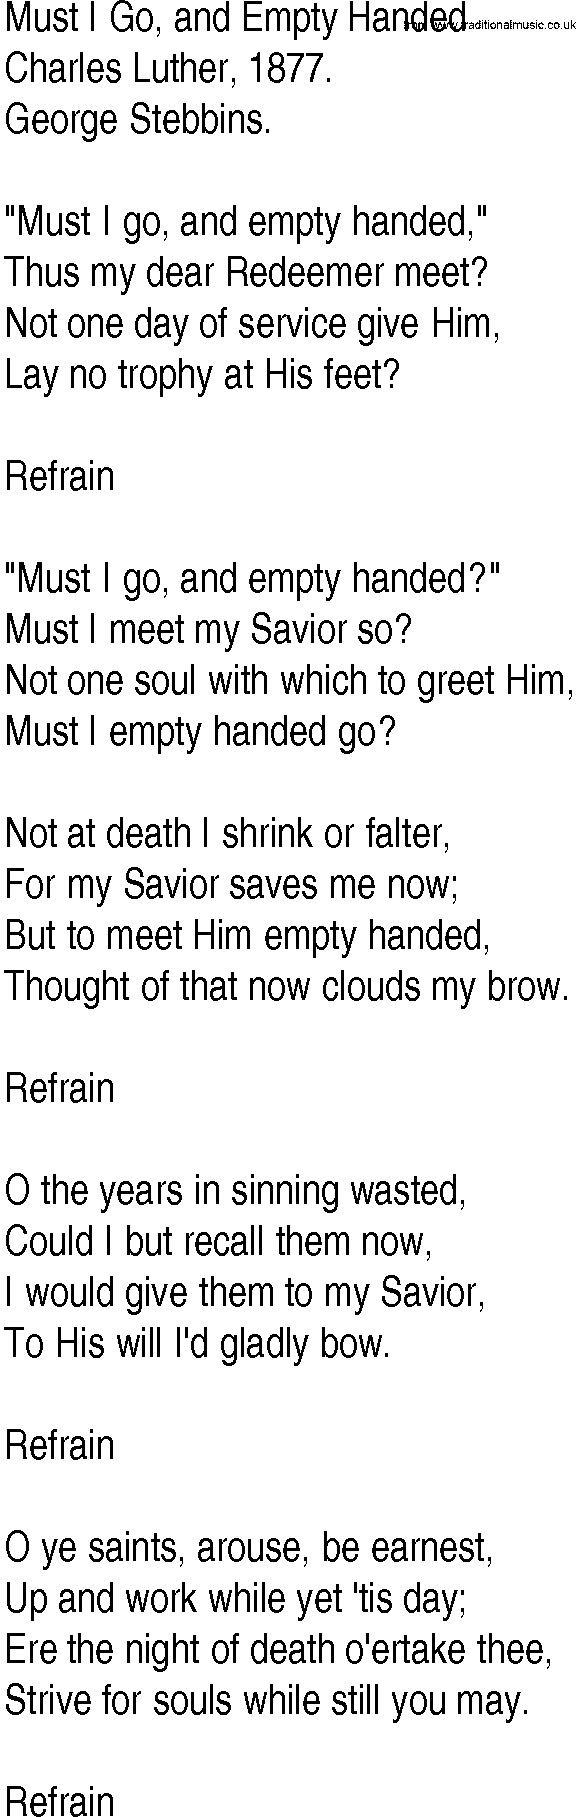 Hymn and Gospel Song: Must I Go, and Empty Handed by Charles Luther lyrics